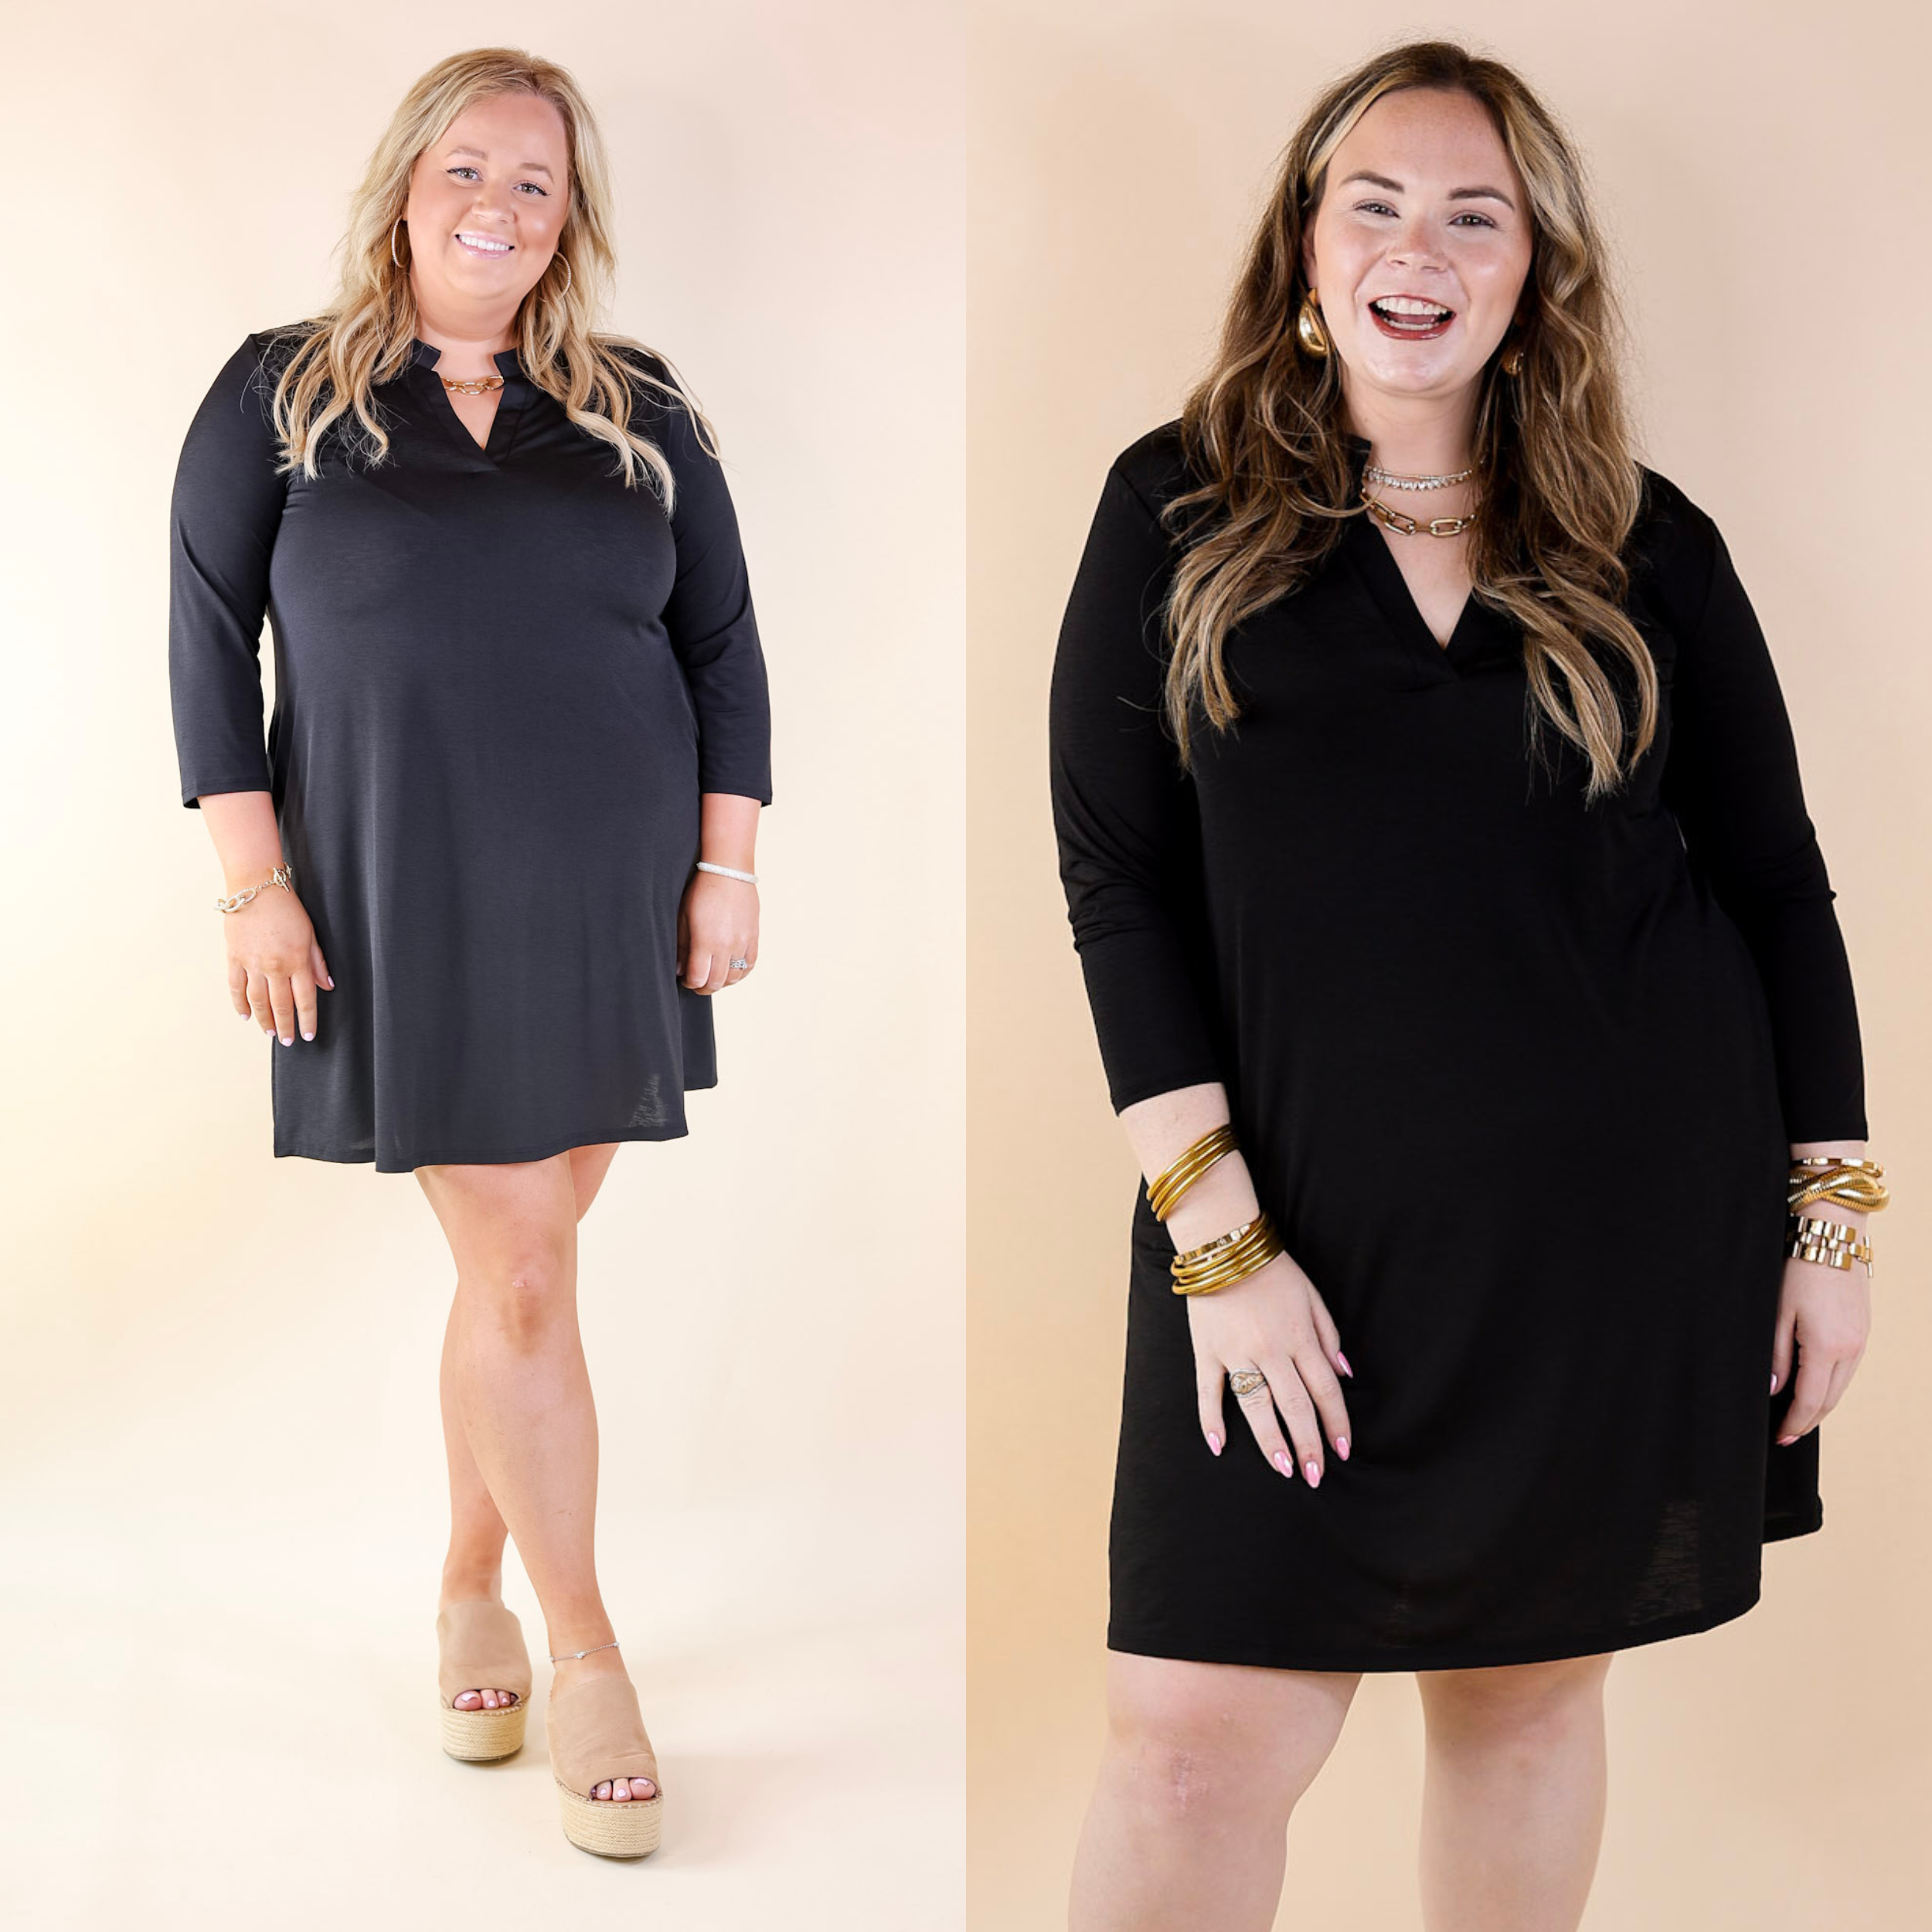 Best Discovery 3/4 Sleeve Mandarin Collar Dress in Black - Giddy Up Glamour Boutique